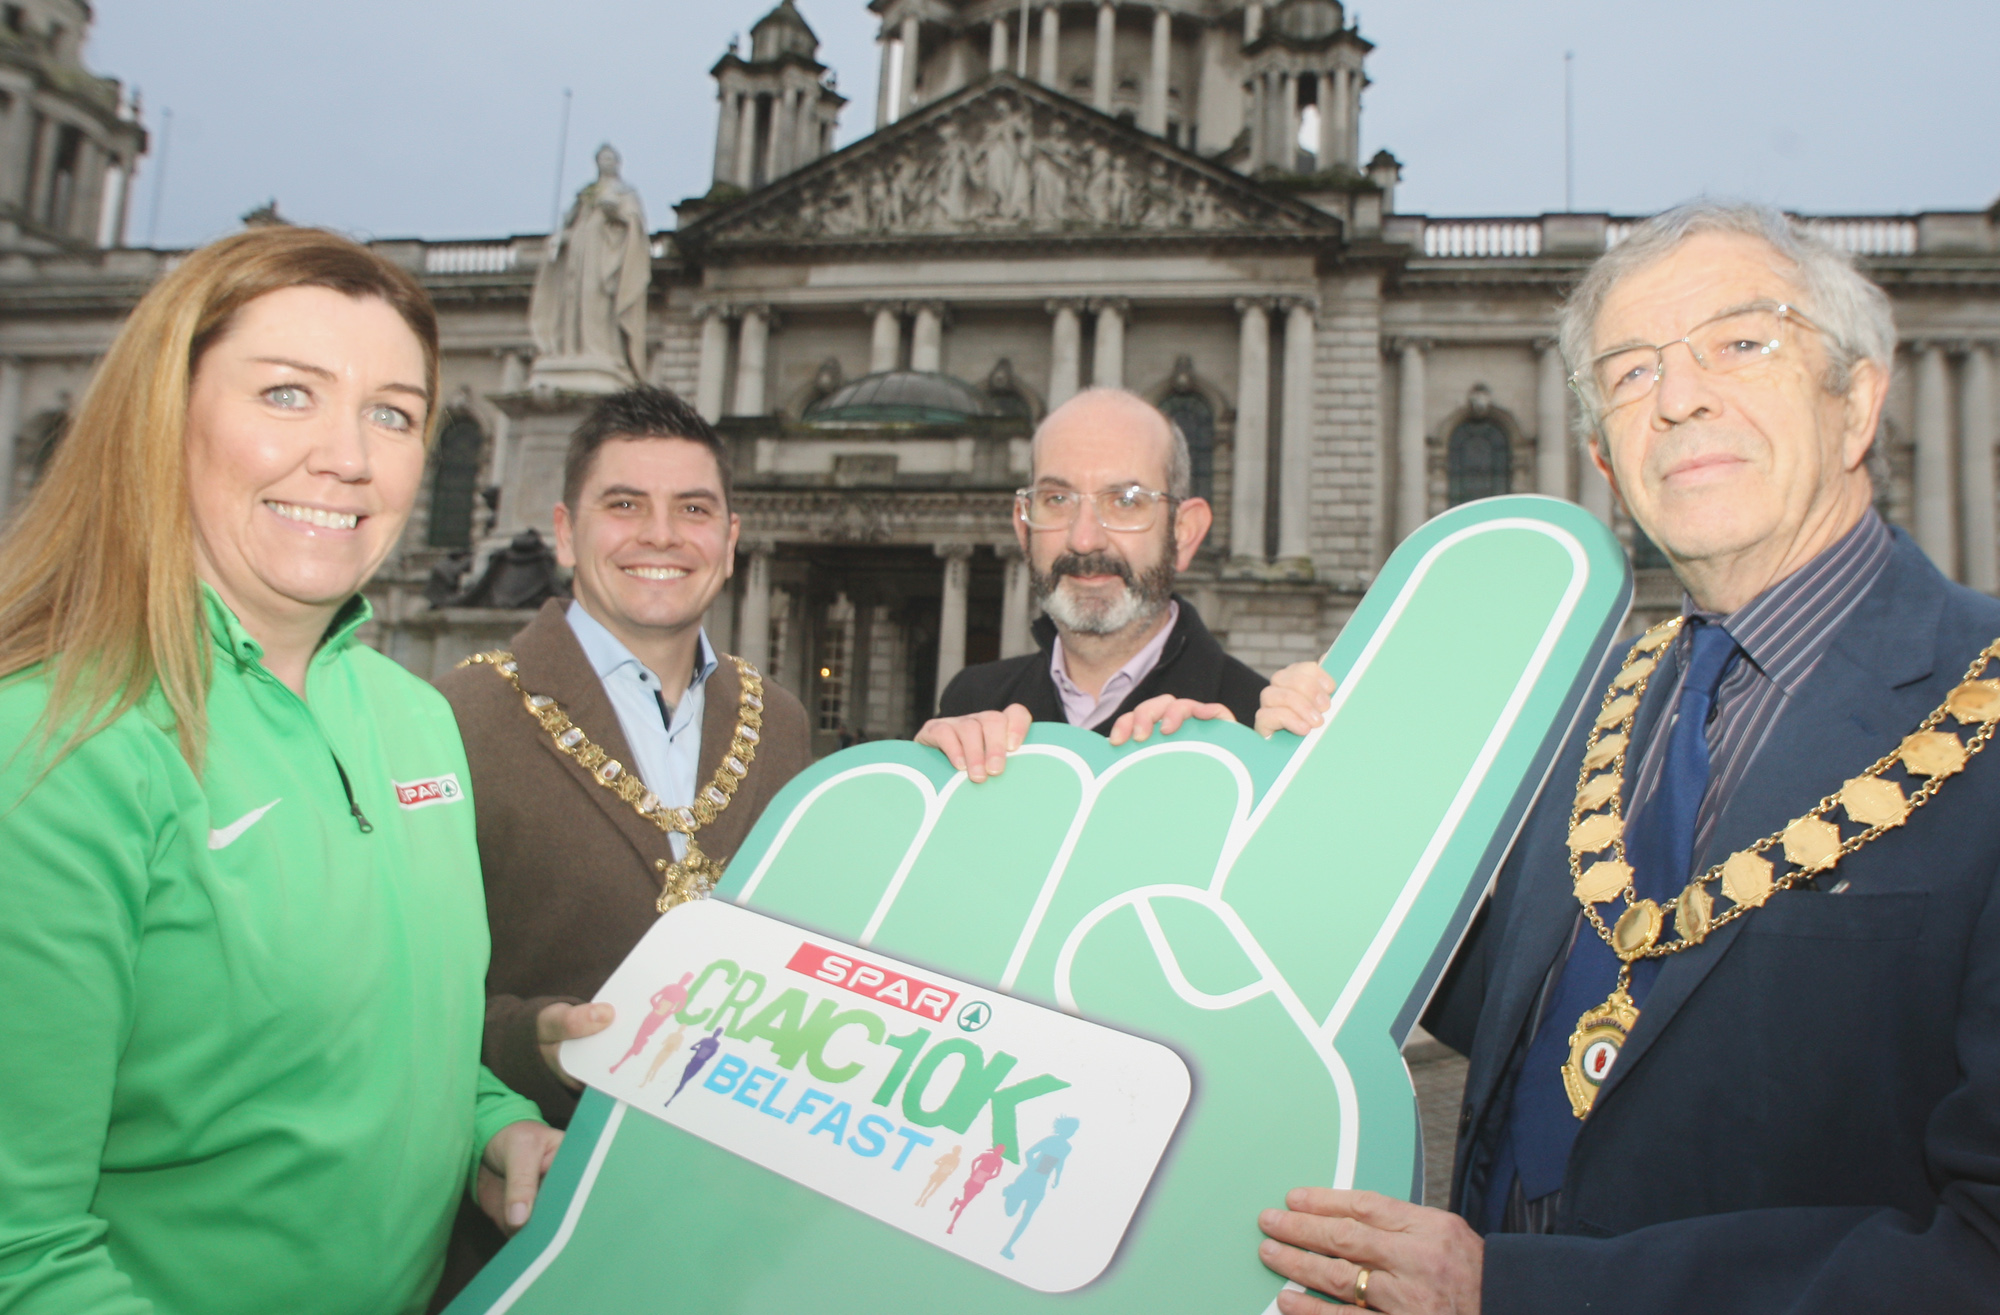 ON YOUR MARKS: Bronagh Luke from SPAR; Ian Taylor, President, Athletics NI; Conor O’Kane from Marie Curie; and Lord Mayor Daniel Baker\n